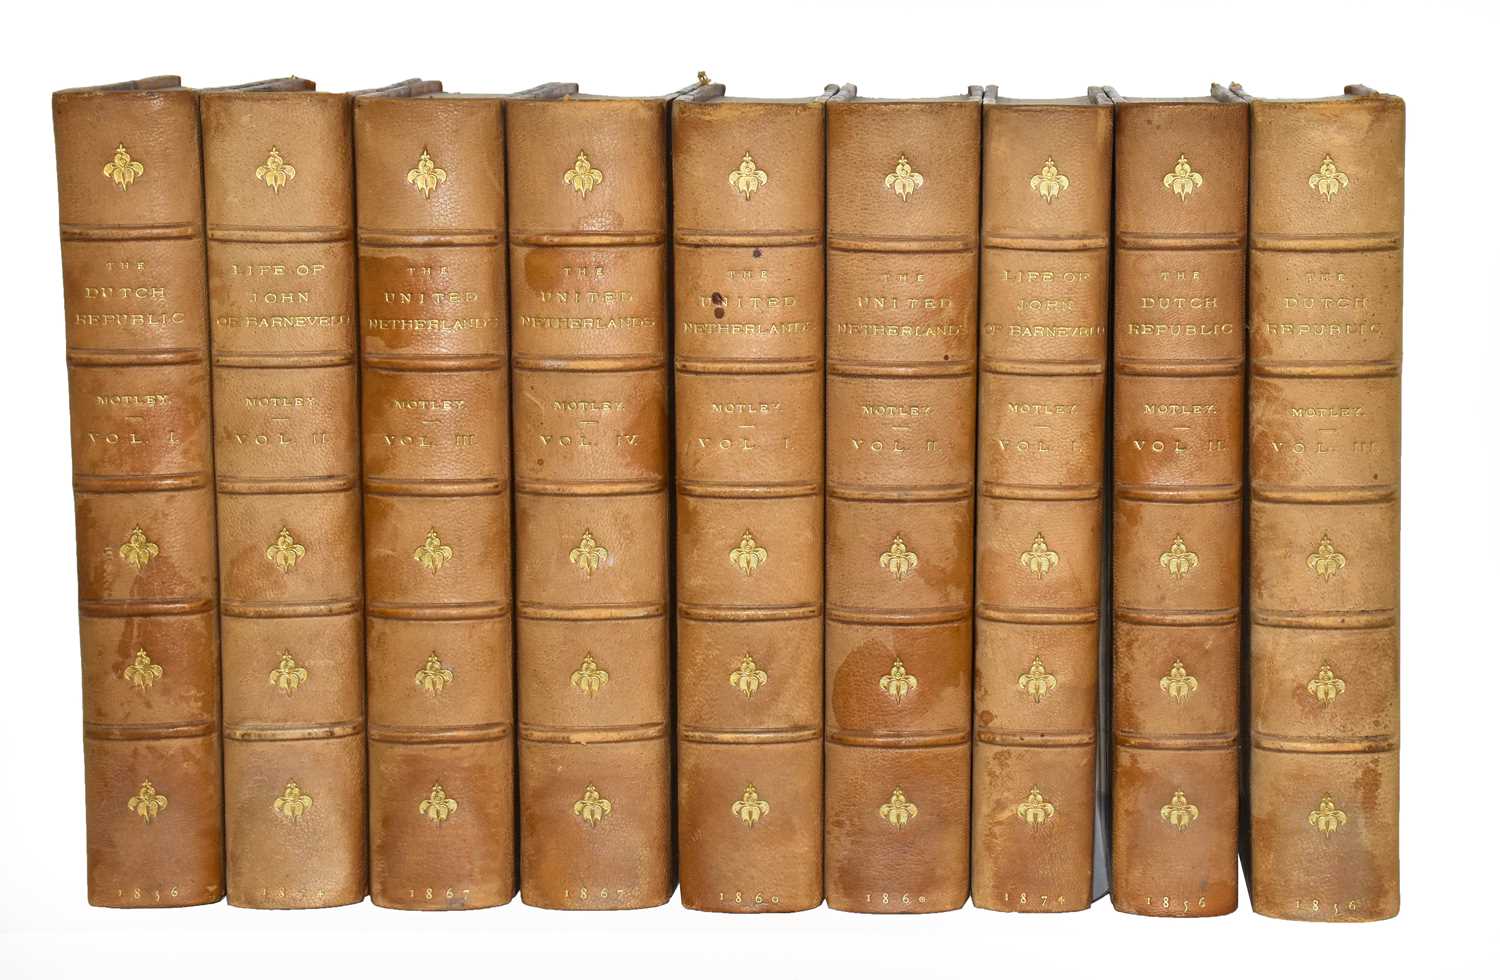 Bindings. Collection of fine bindings, including:Mottley (John Lothrop). The Rise of the Dutch - Image 3 of 3